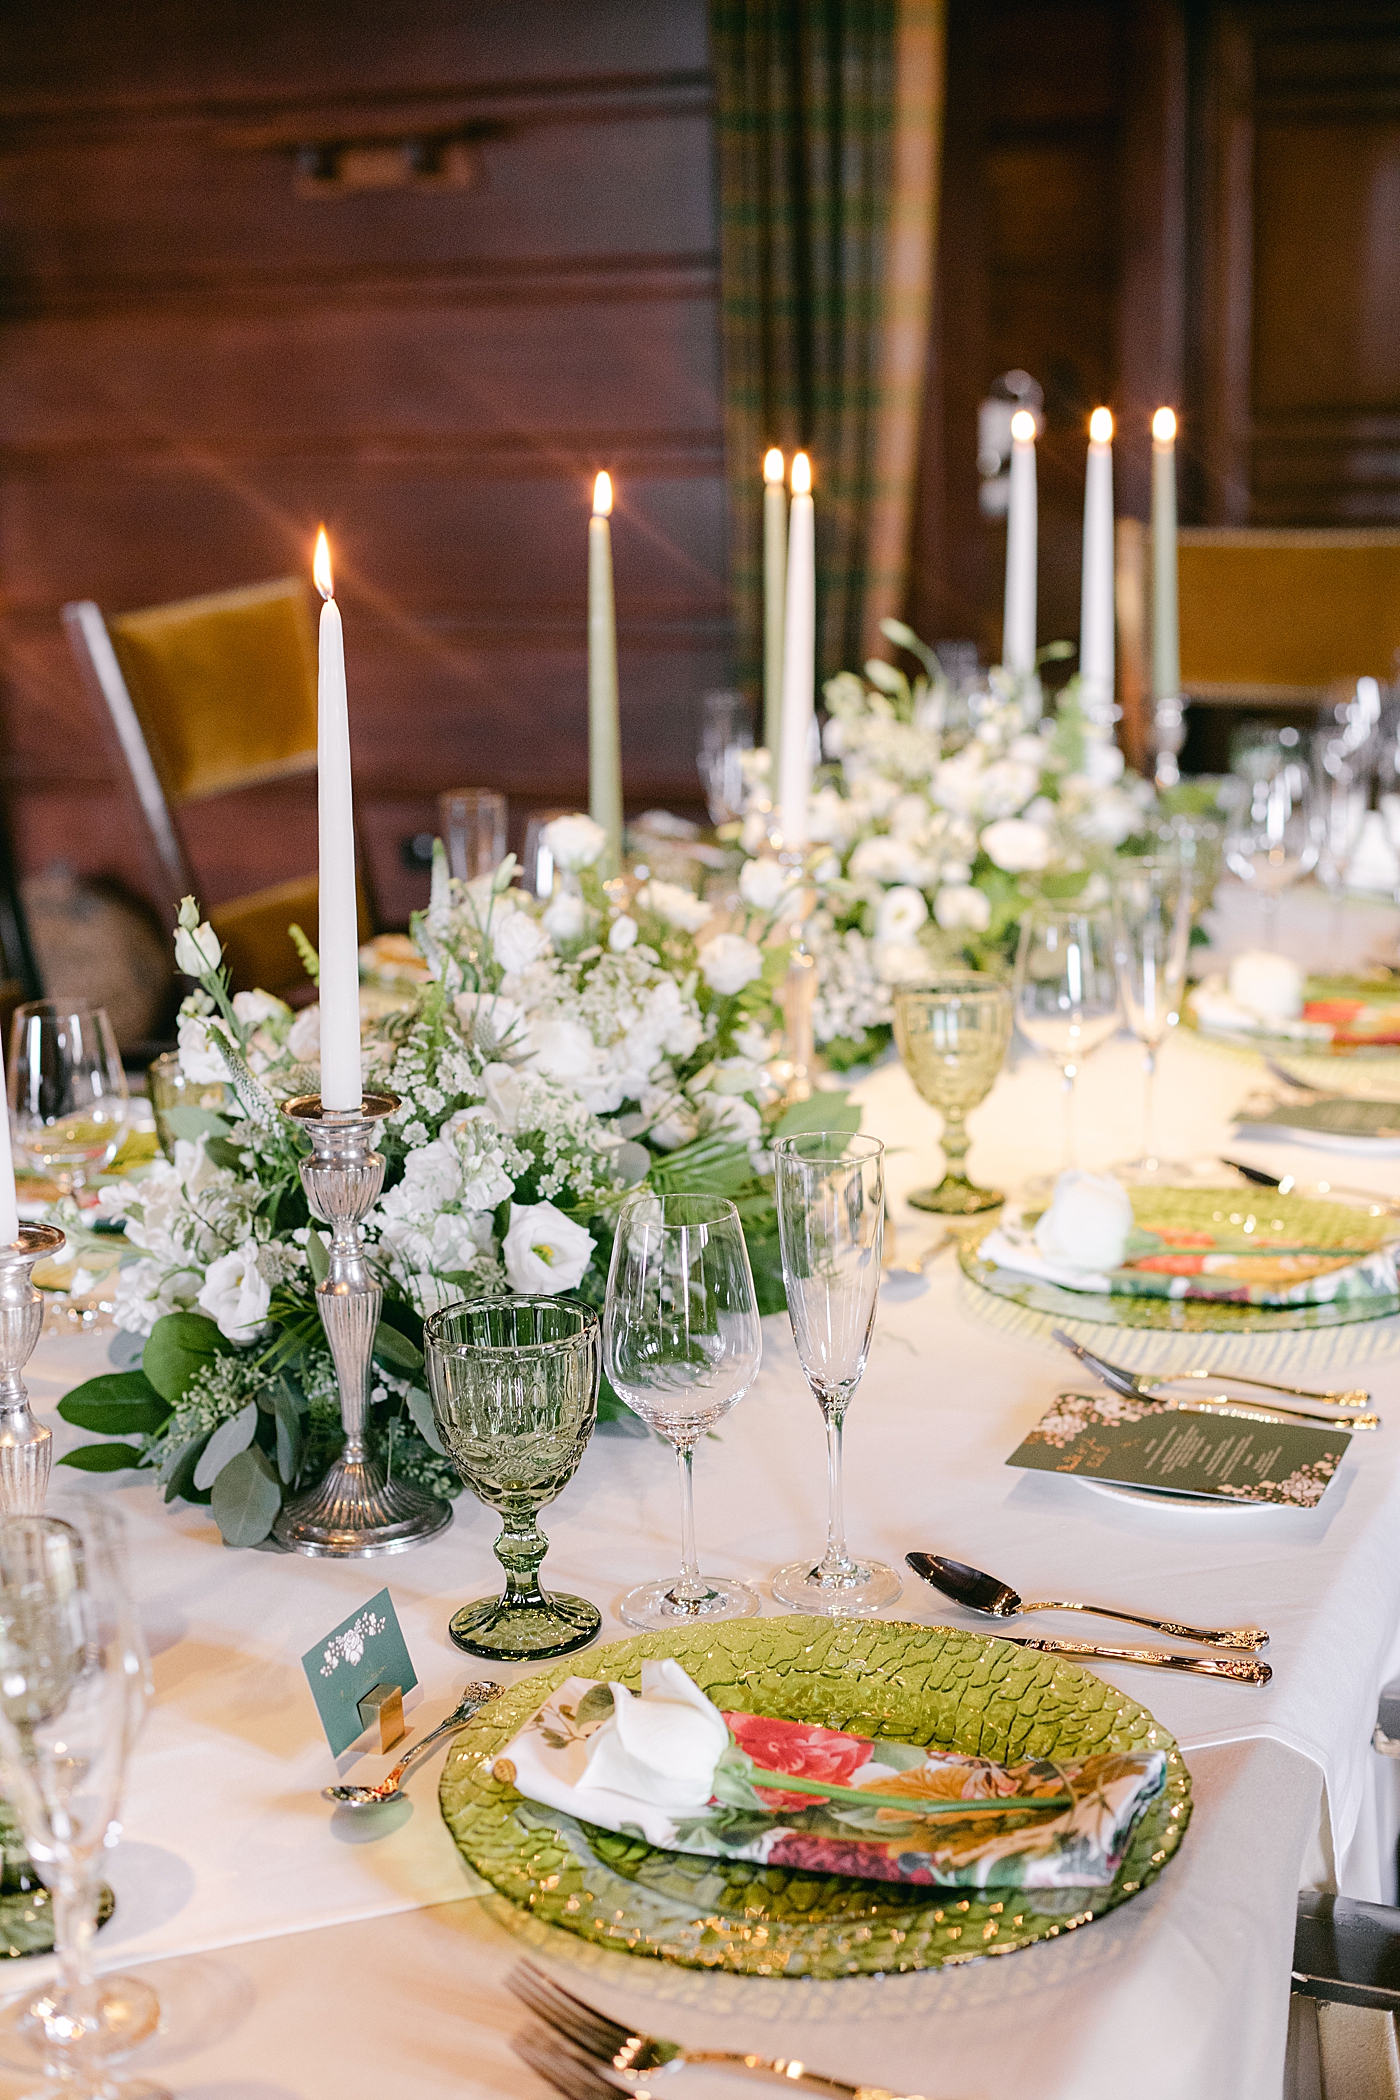 Reception table during Lake Placid Lodge Wedding | Image by Hope Helmuth Photography